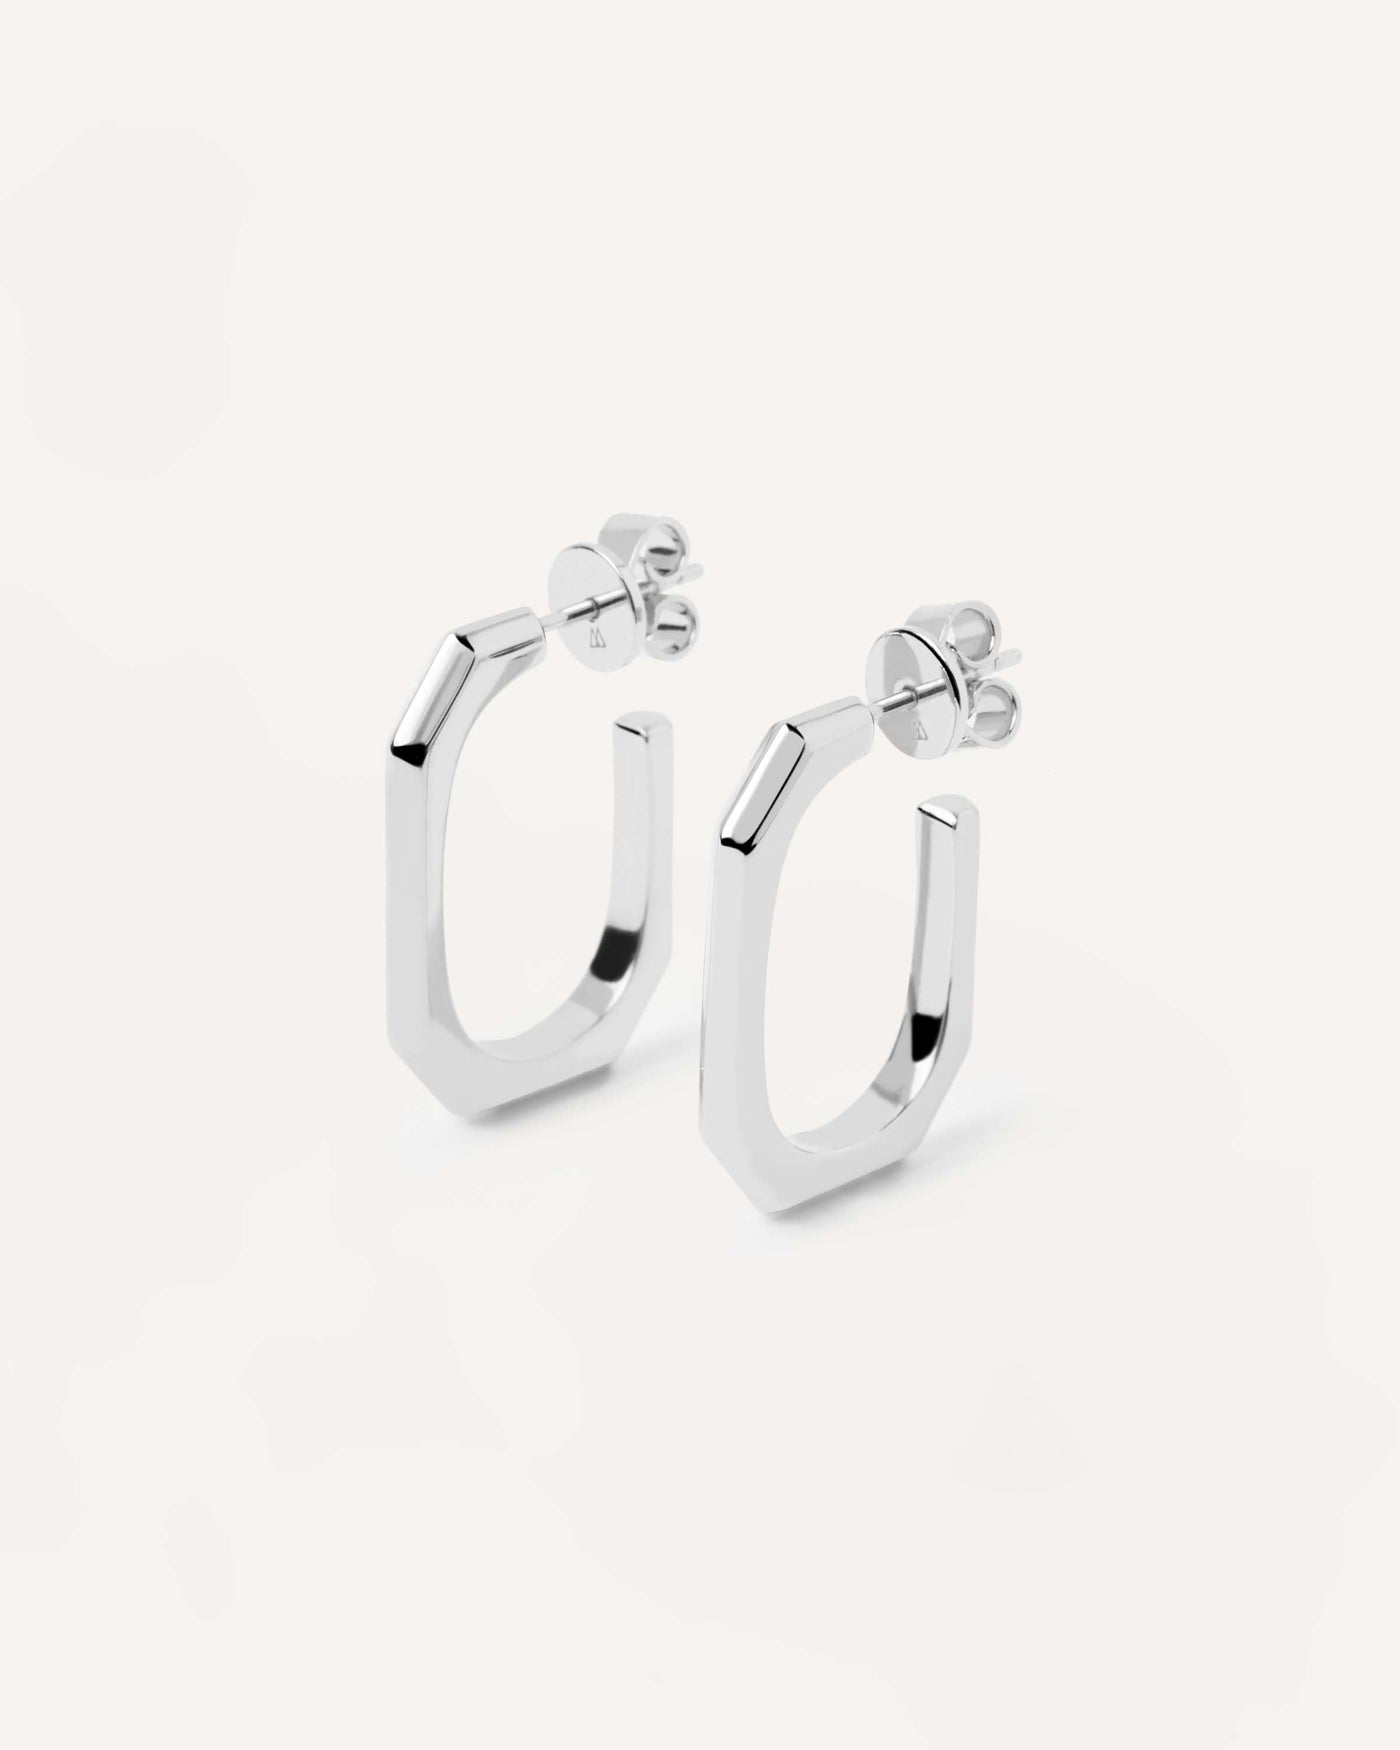 2023 Selection | Signature Link Silver Earrings. Octogonal plain earrings shaped as cable links in silver rhodium plating. Get the latest arrival from PDPAOLA. Place your order safely and get this Best Seller. Free Shipping.